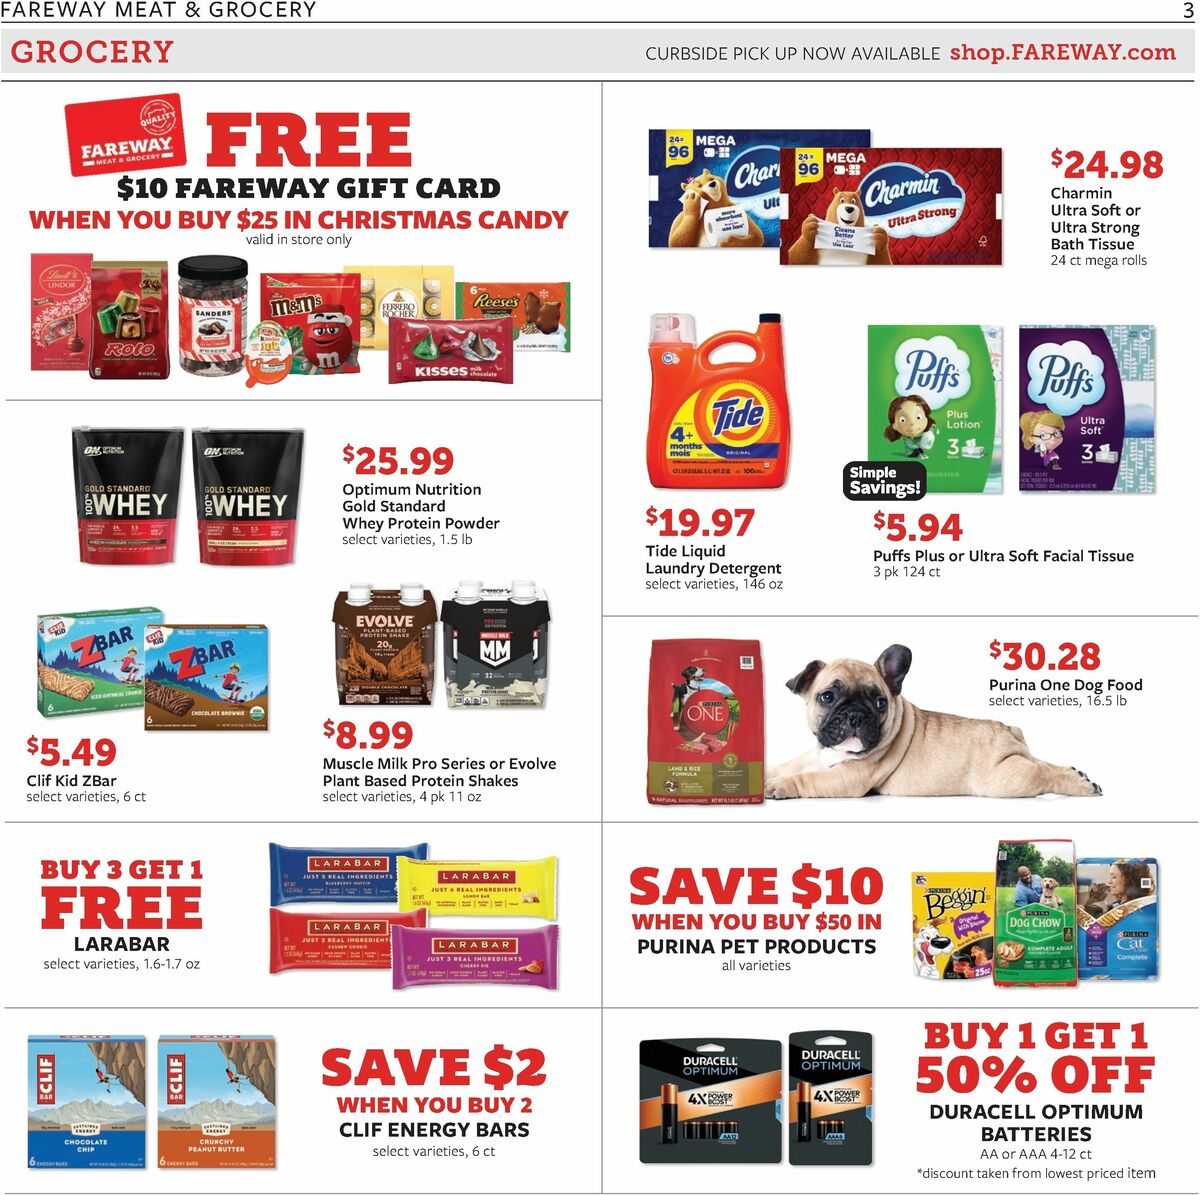 Fareway Weekly Ad from December 11